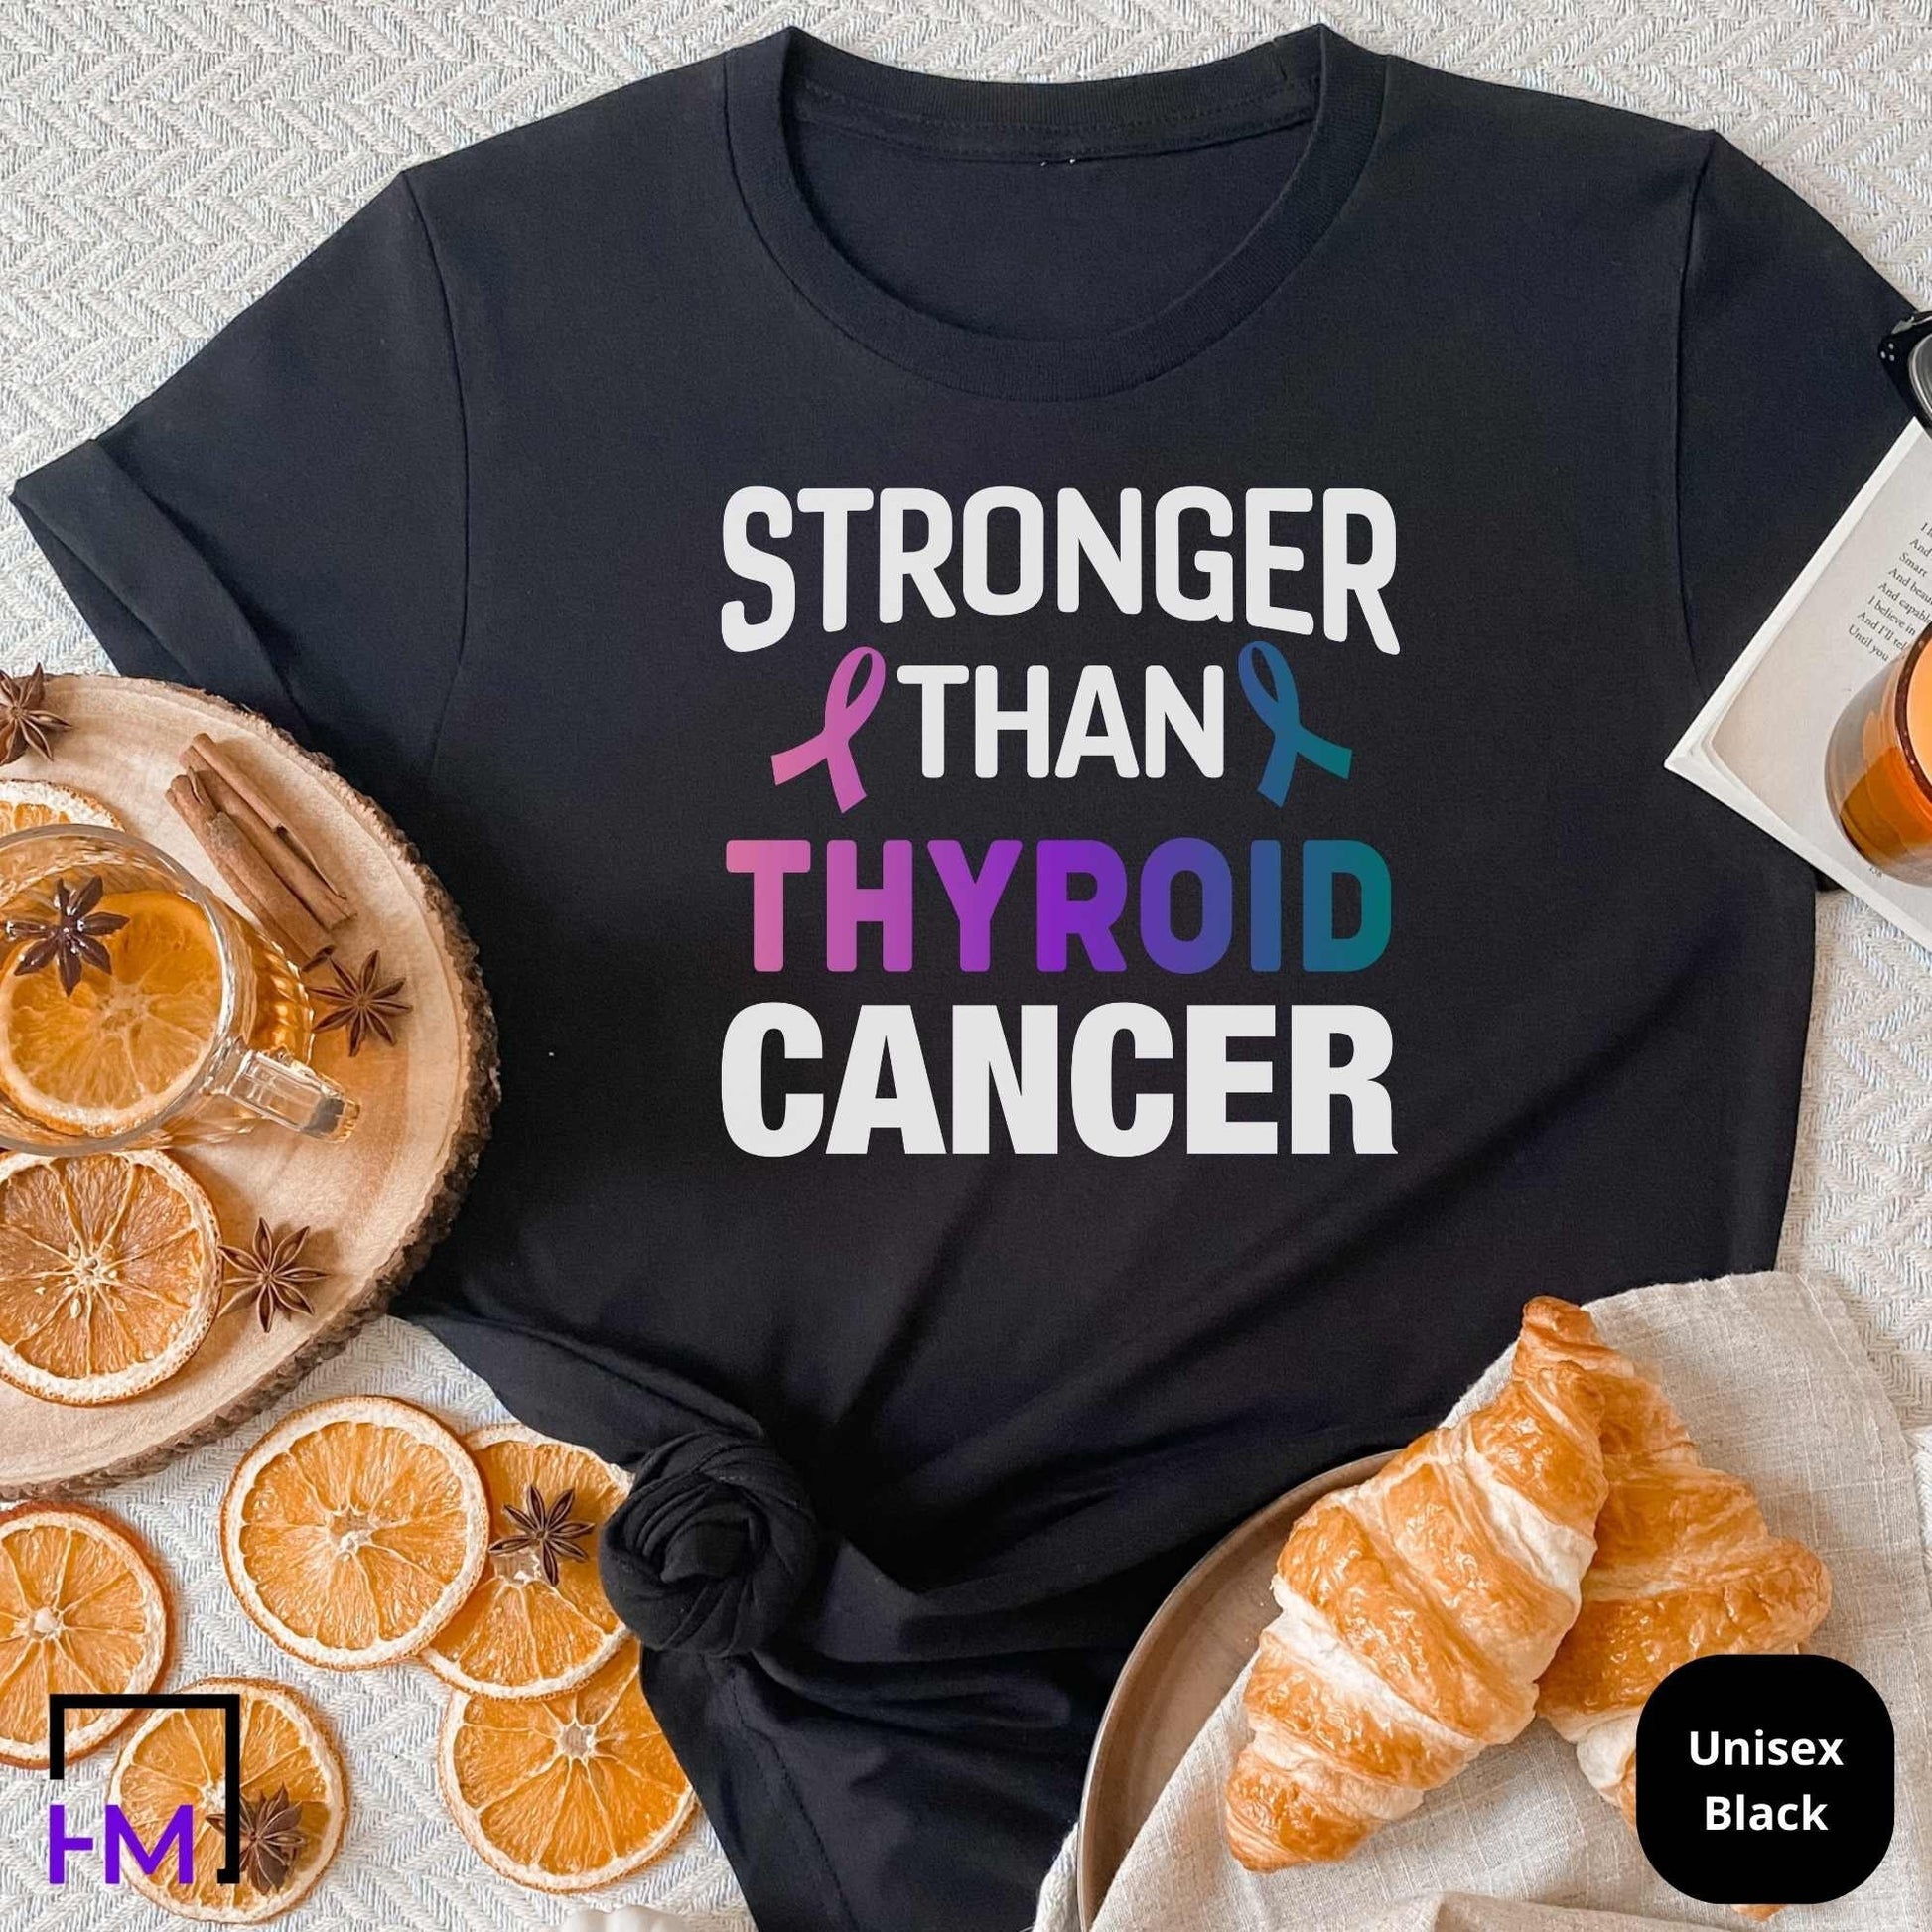 Stronger than Thyroid Cancer Shirt, Womens Cancer Fighter Tops, Survivor Gift for Her, Purple Teal Pink Ribbon, Thyroid Cancer Awareness